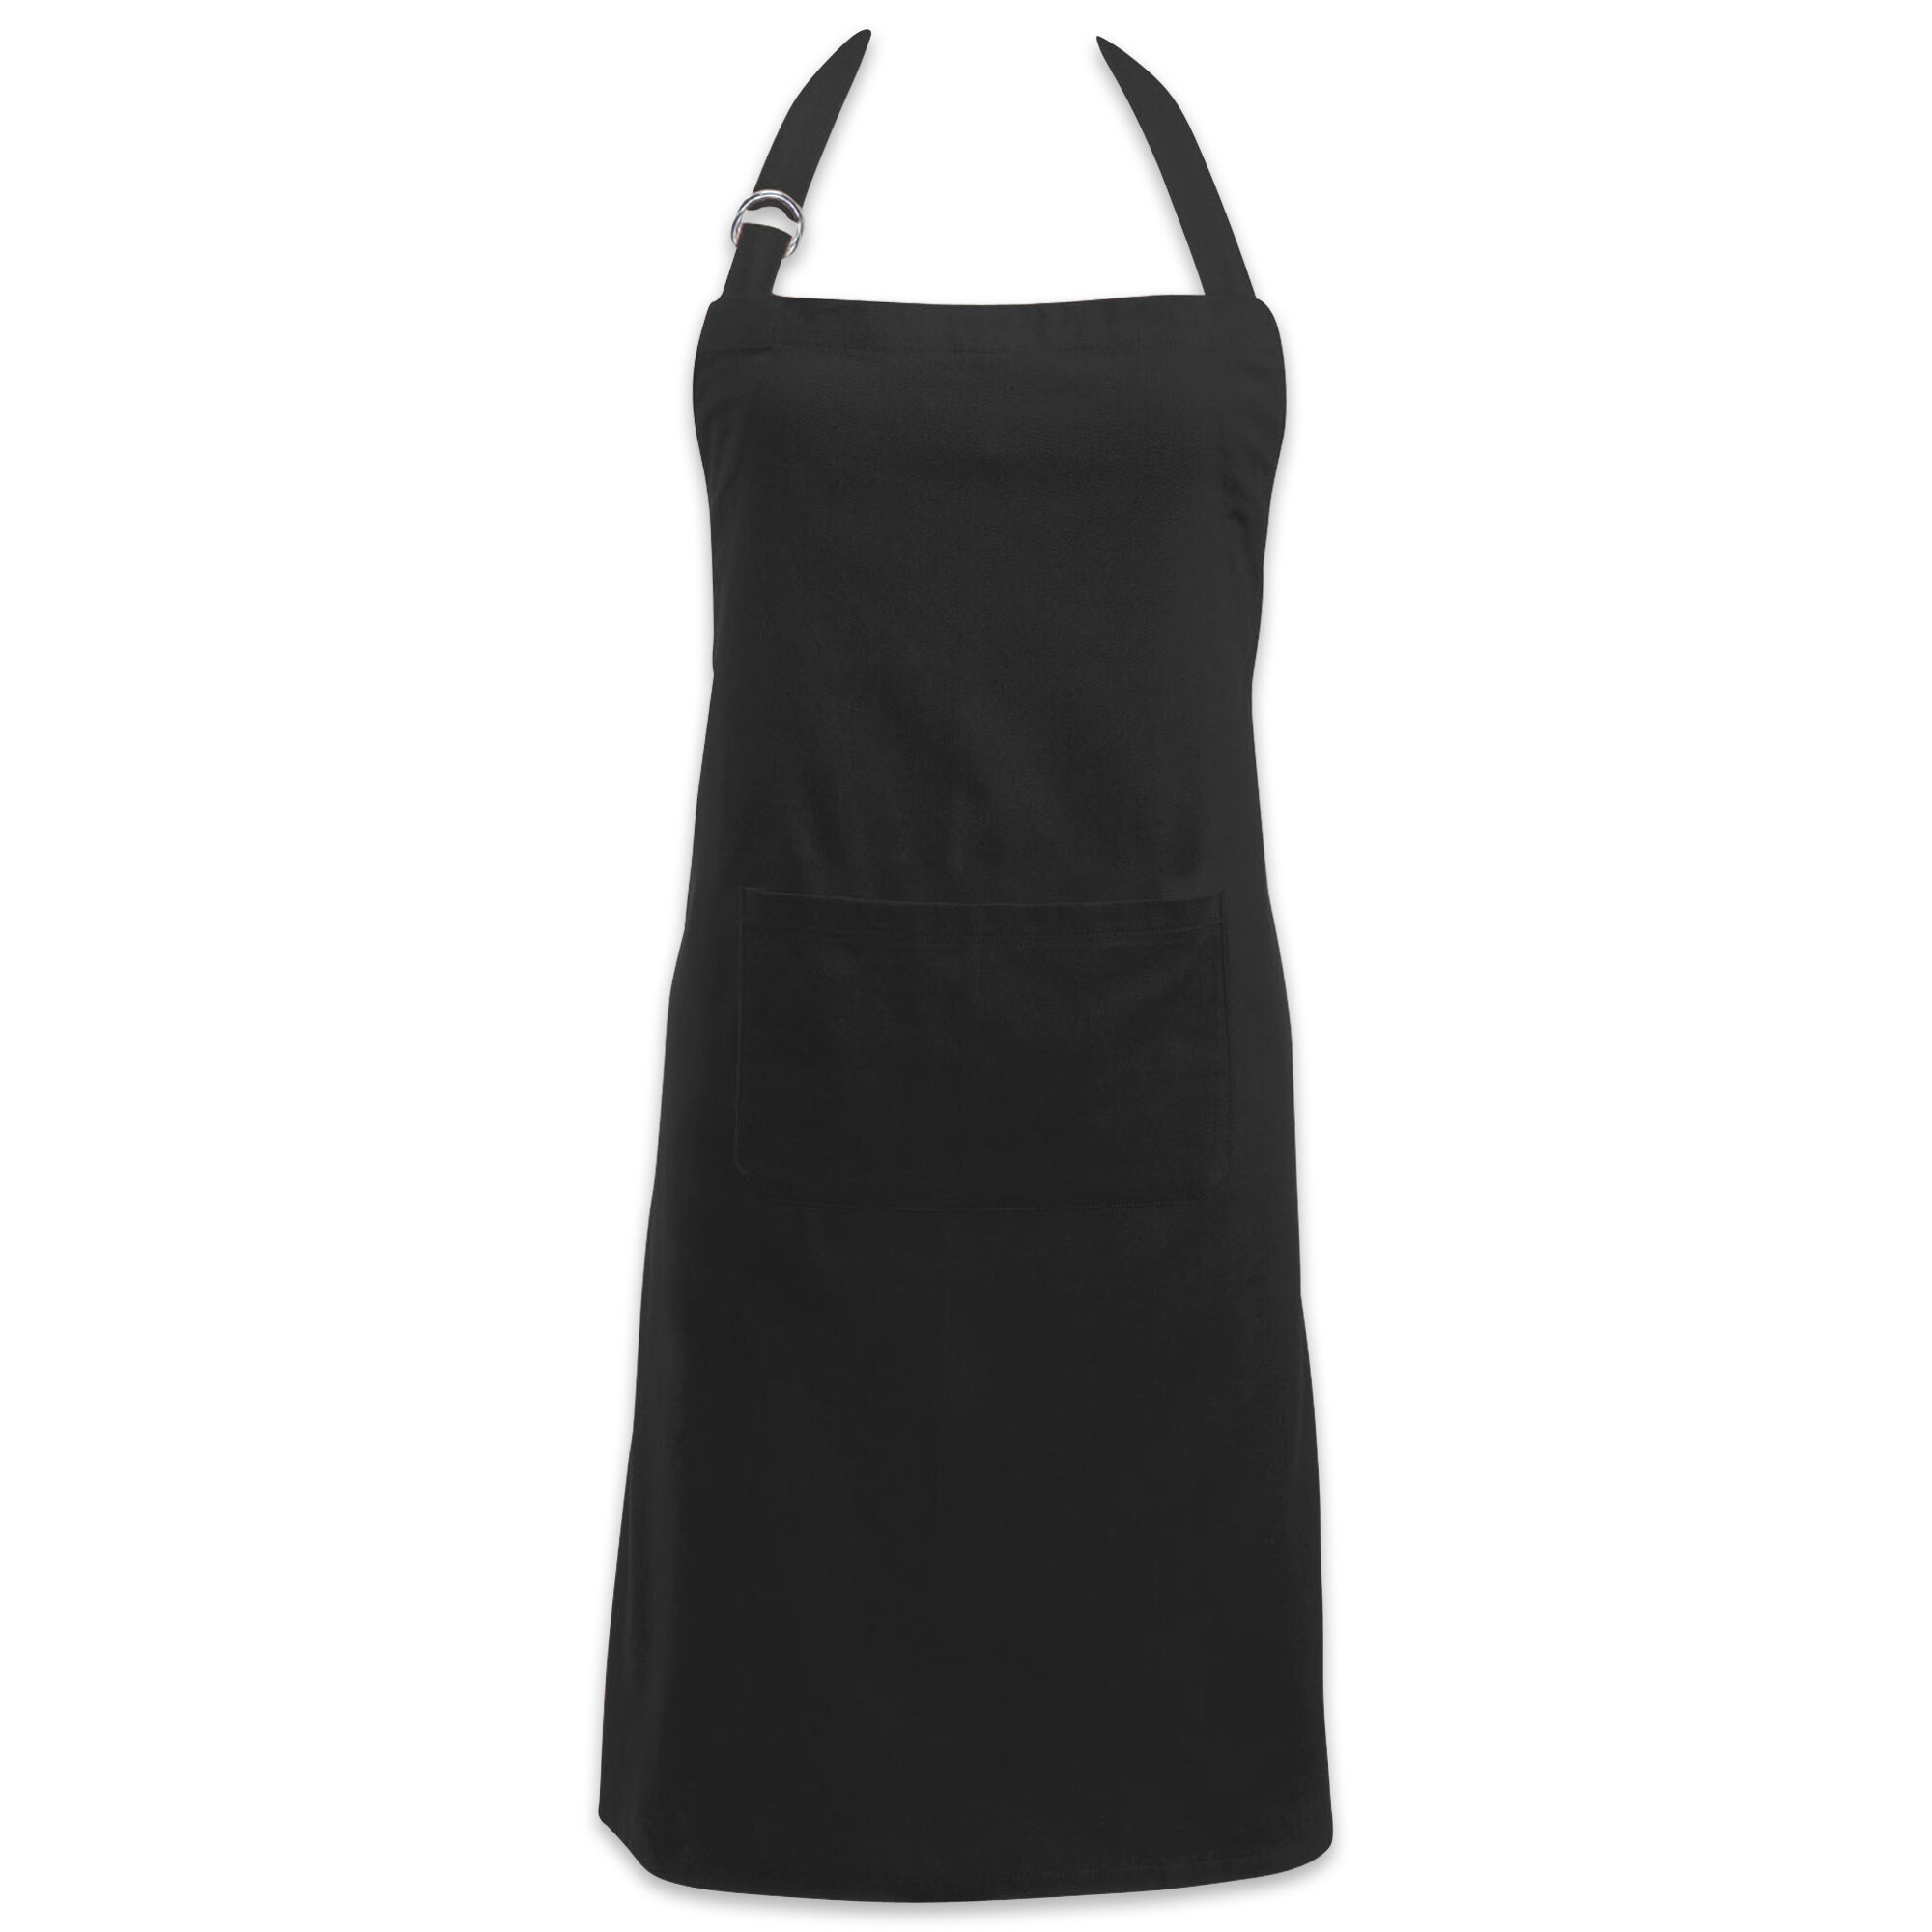 Funny Cooking Apron I Have No Idea What I'm Doing, Black BBQ Aprons, Two  Pockets, Fully Adjustable